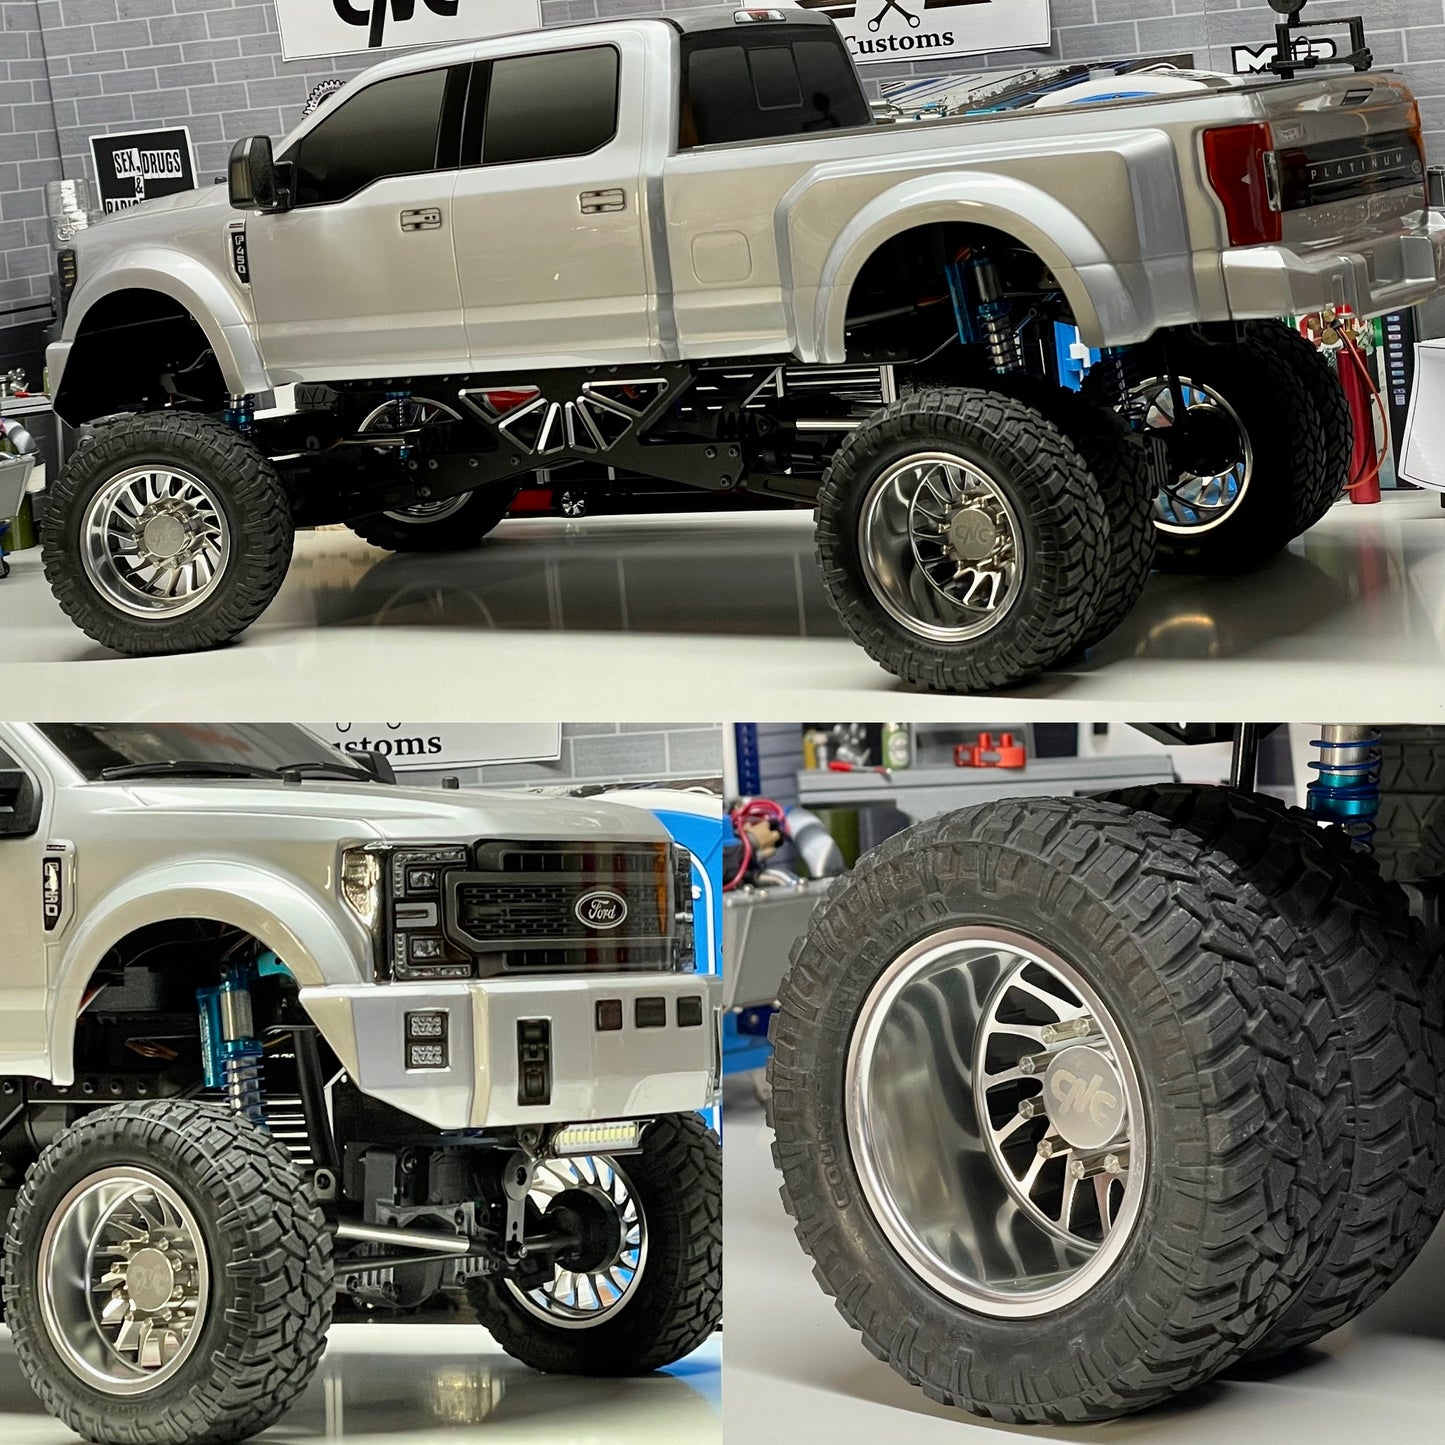 "Brodoz" Super Single Front and Dually Rear Directional Aluminum Billet Wheels: Comes as a Compete Set for the CEN F450